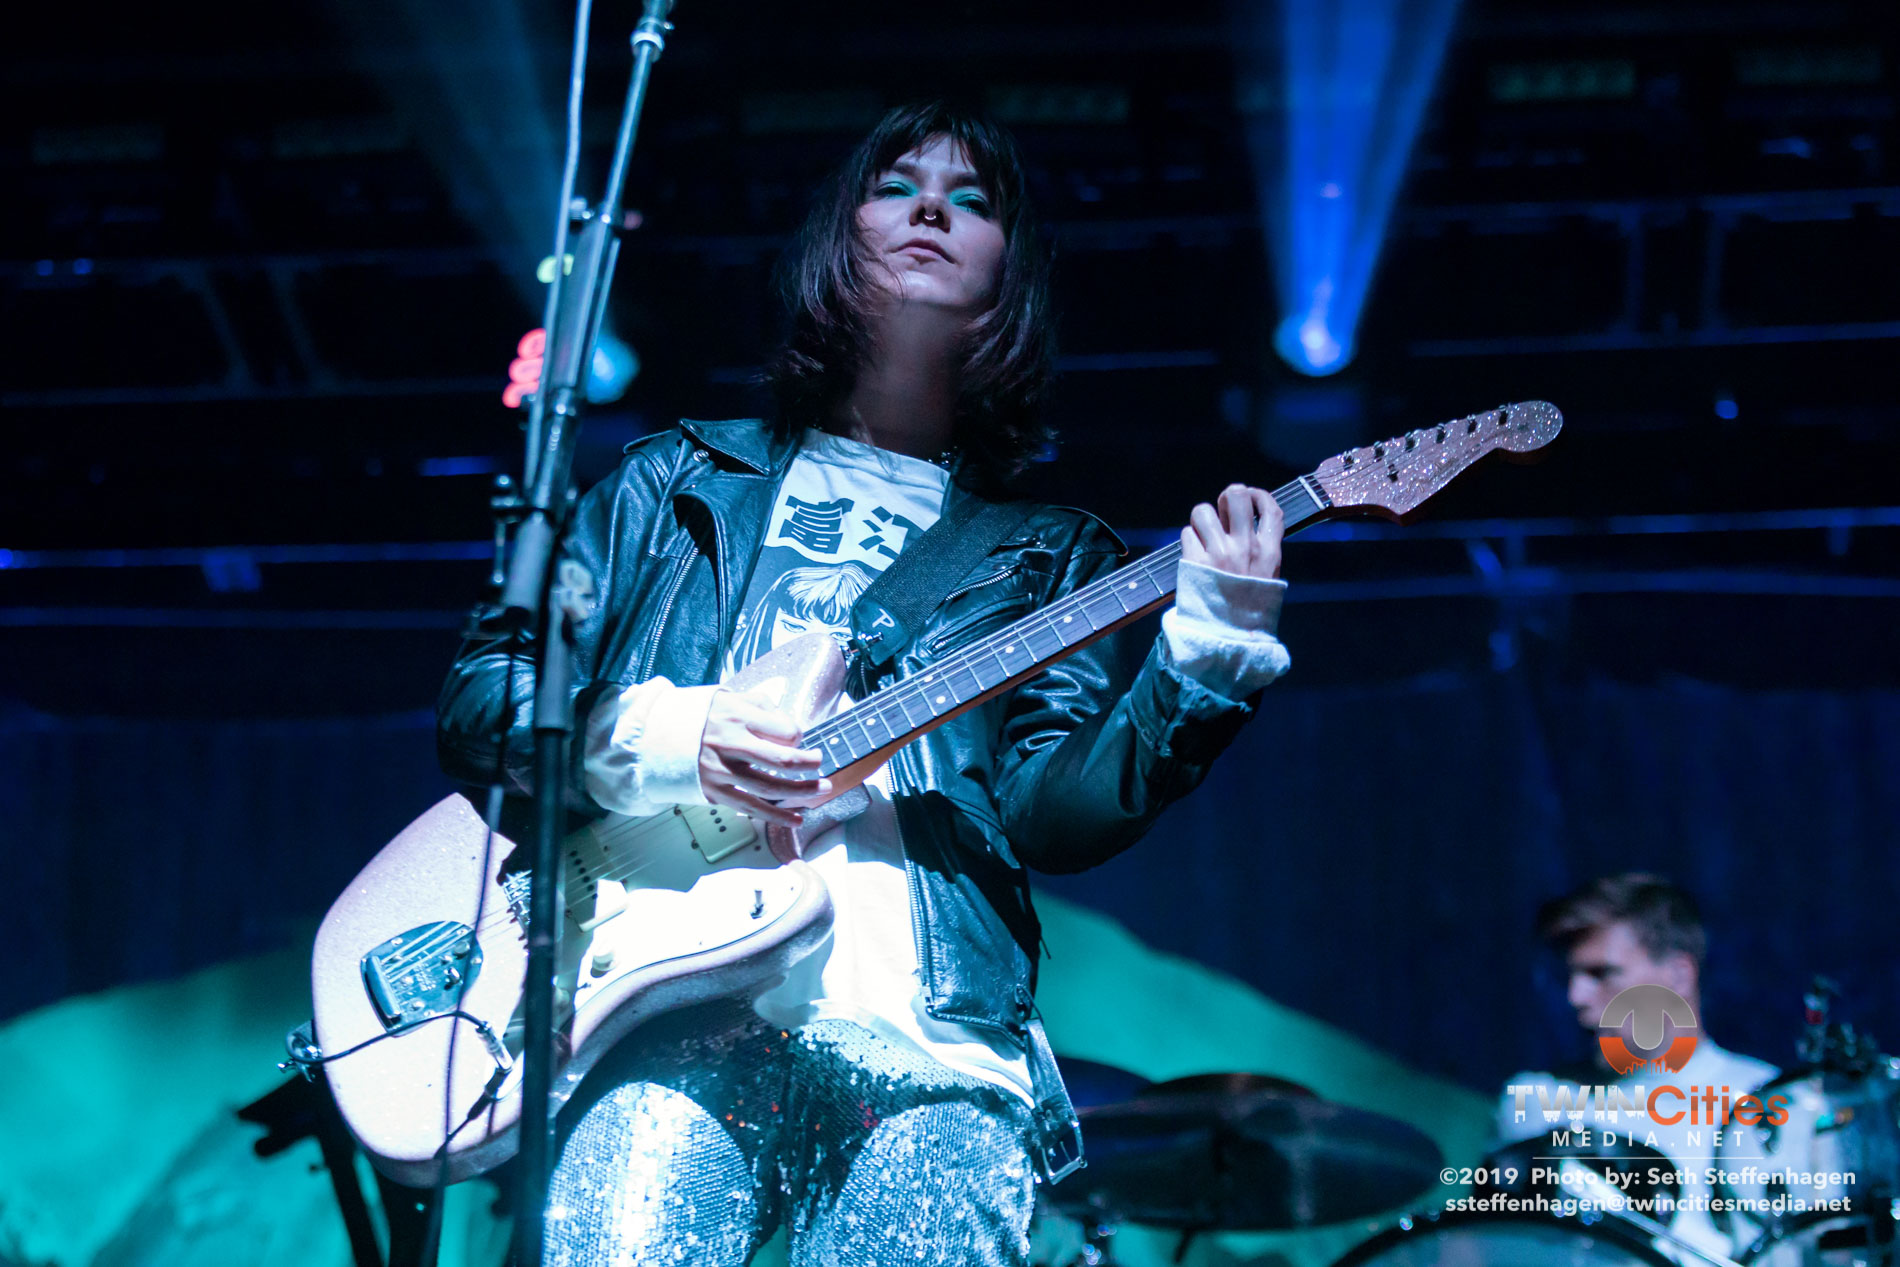 September 14, 2019 - Minneapolis, Minnesota, United States - Of Monsters And Men live in concert at Surly Brewing Festival Field along with Lower Dens as the openers.(Photo by Seth Steffenhagen/Steffenhagen Photography)